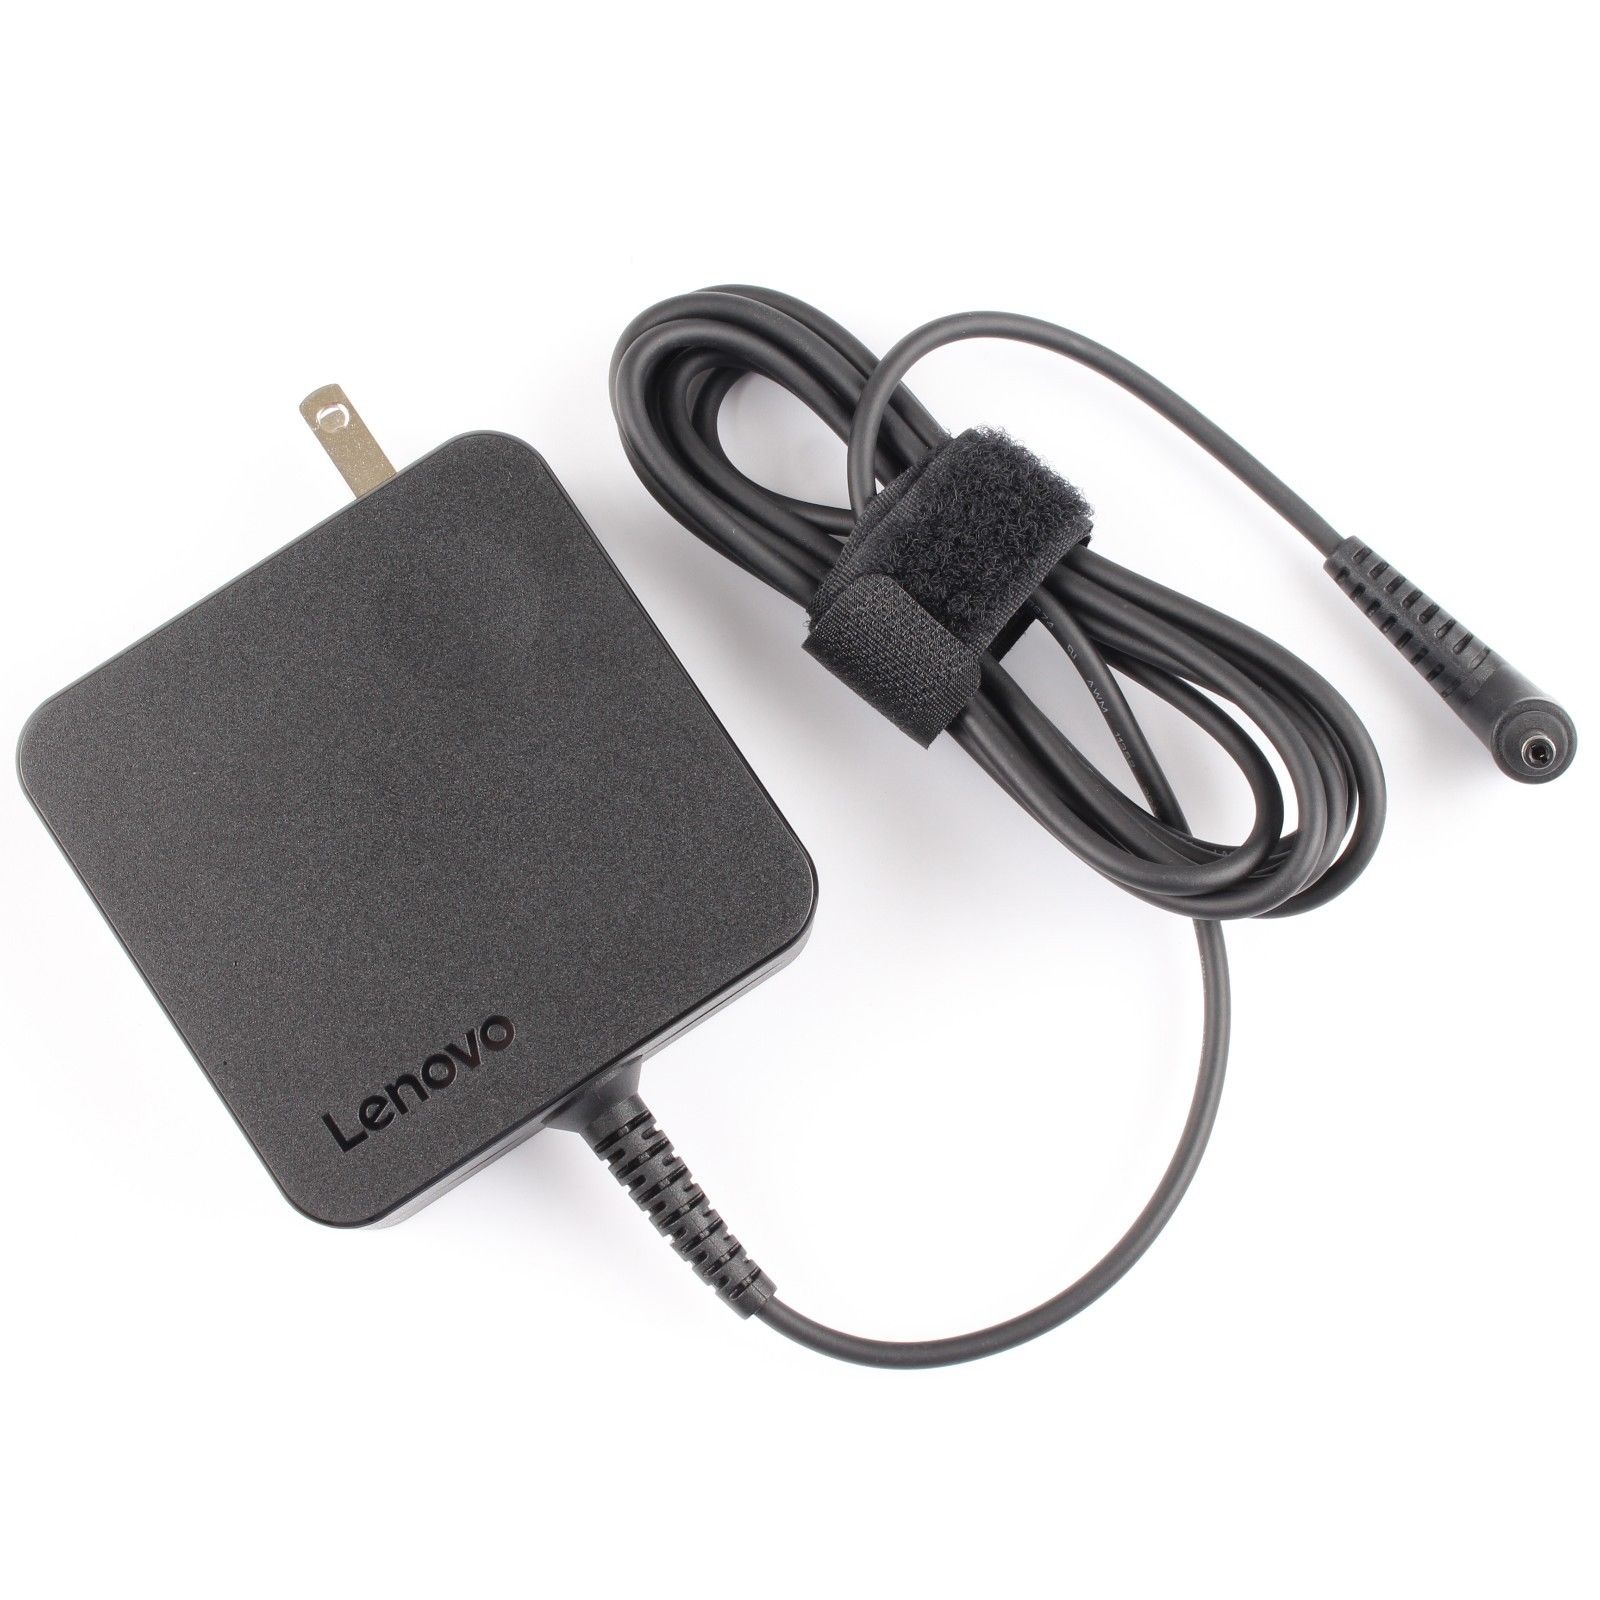 Original Lenovo Flex 6-14IKB 2-in-1 Touch Screen Charger AC Adapter